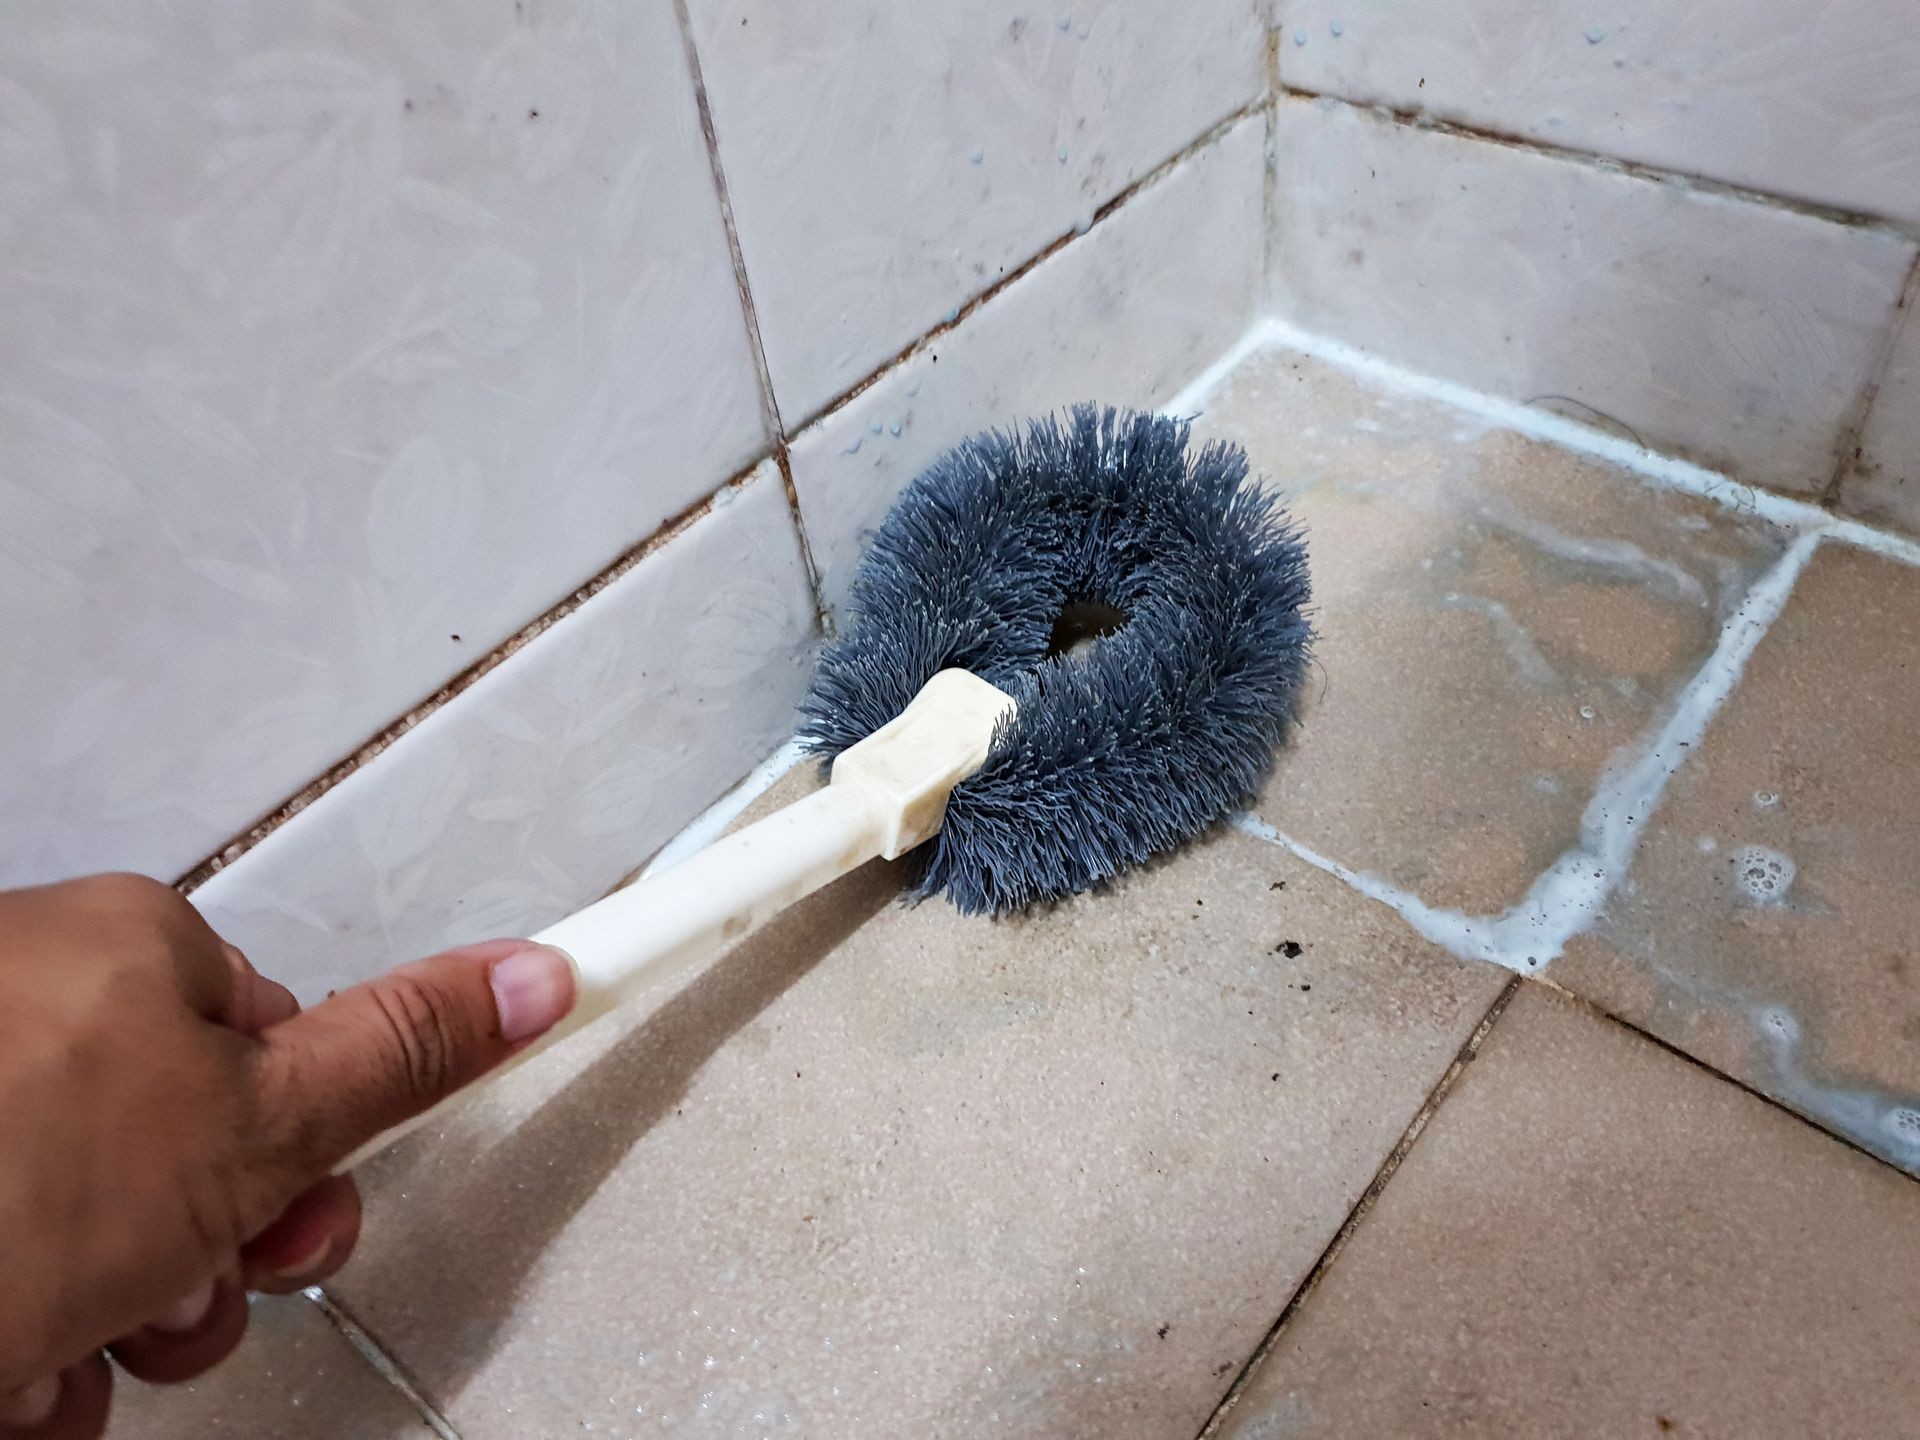 Move-in and move-out cleaning covers meticulous detail to every dirty nook, even this unkept bathroom tile.